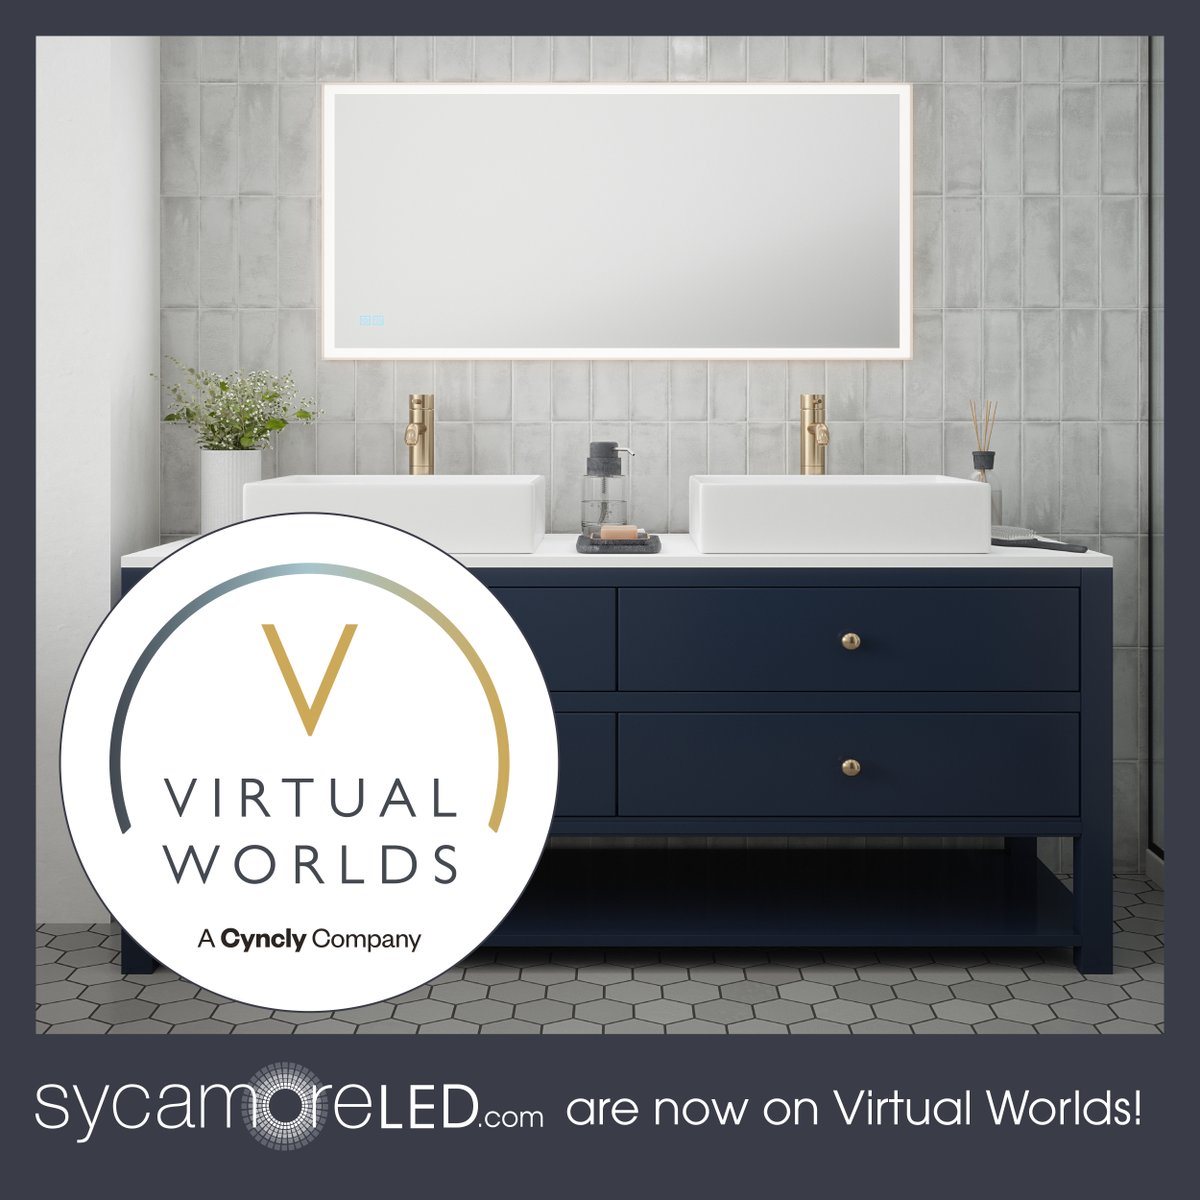 Don't forget our catalogue is now available to download on @virtualworlds3D! Virtual Worlds allows you to add illuminated mirrors and lighting schemes to your designs. #Lighting #VW4d #Cyncly #KBB #Bathroomlighting #Bathroomdesign #LEDlighting #LEDmirrors #Illuminatedmirrors